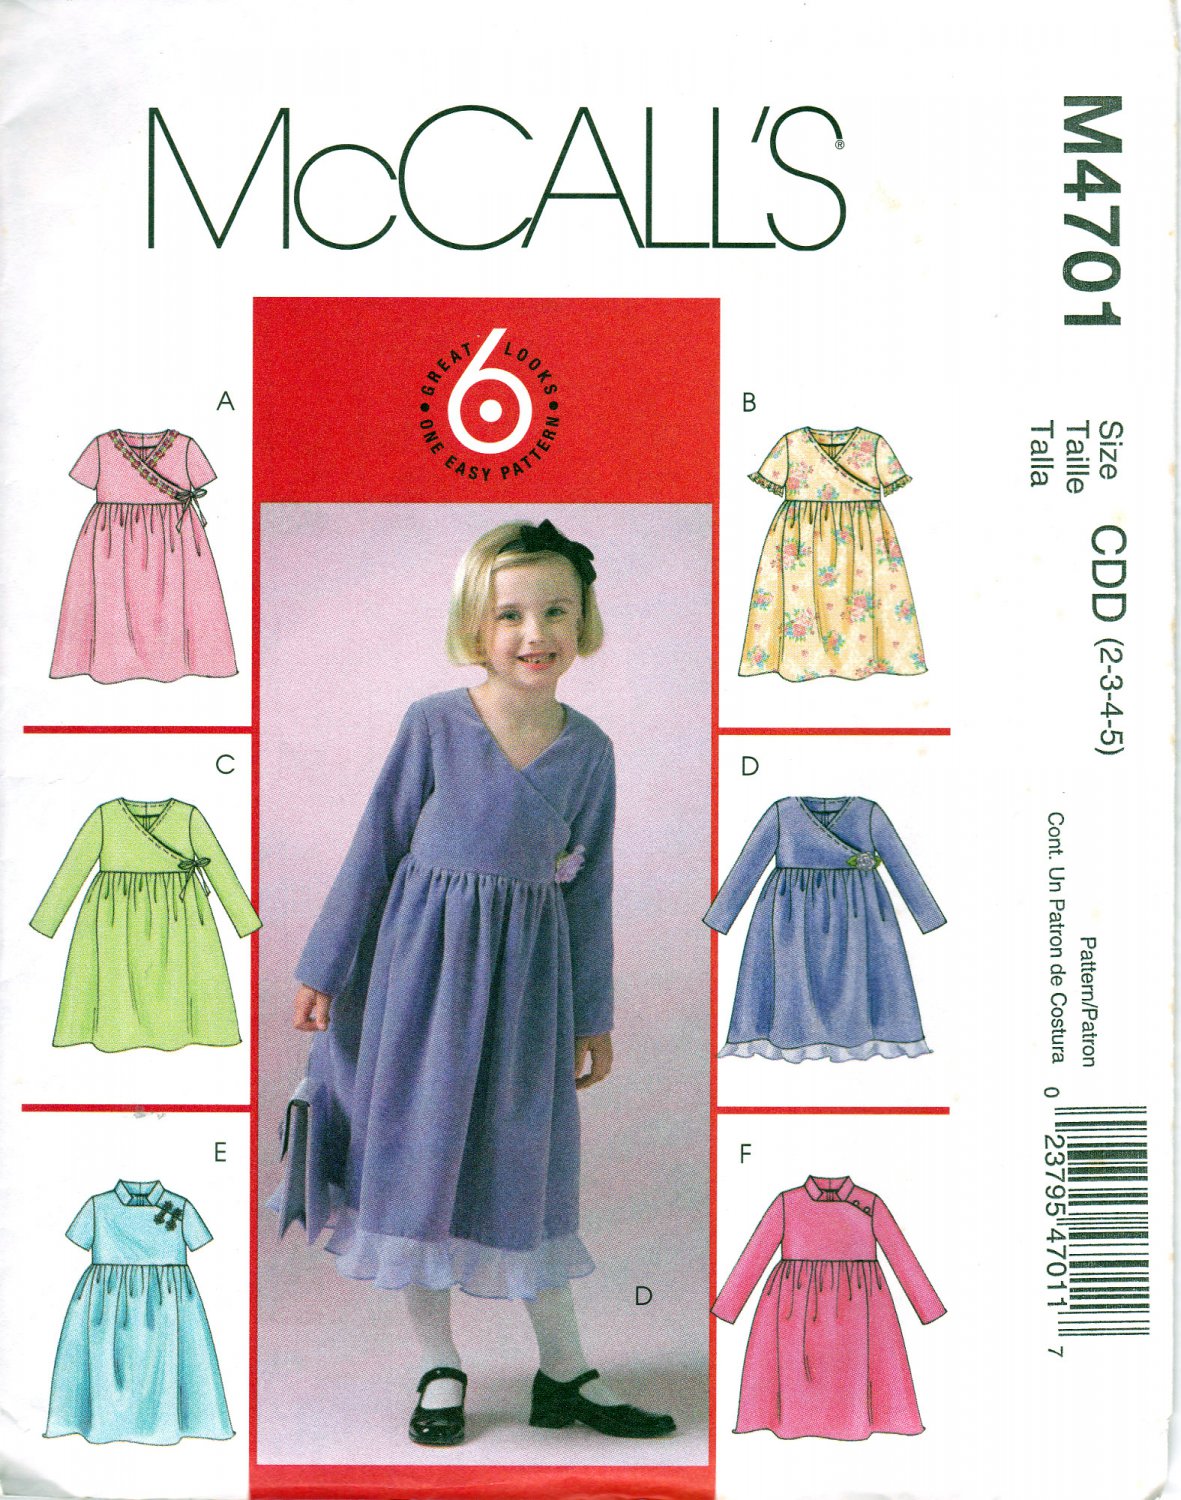 McCall's 4701 M4701 Girls Sewing Pattern Childrens Dresses Kids Sizes 2-3-4-5 Easy Sew 6 Looks